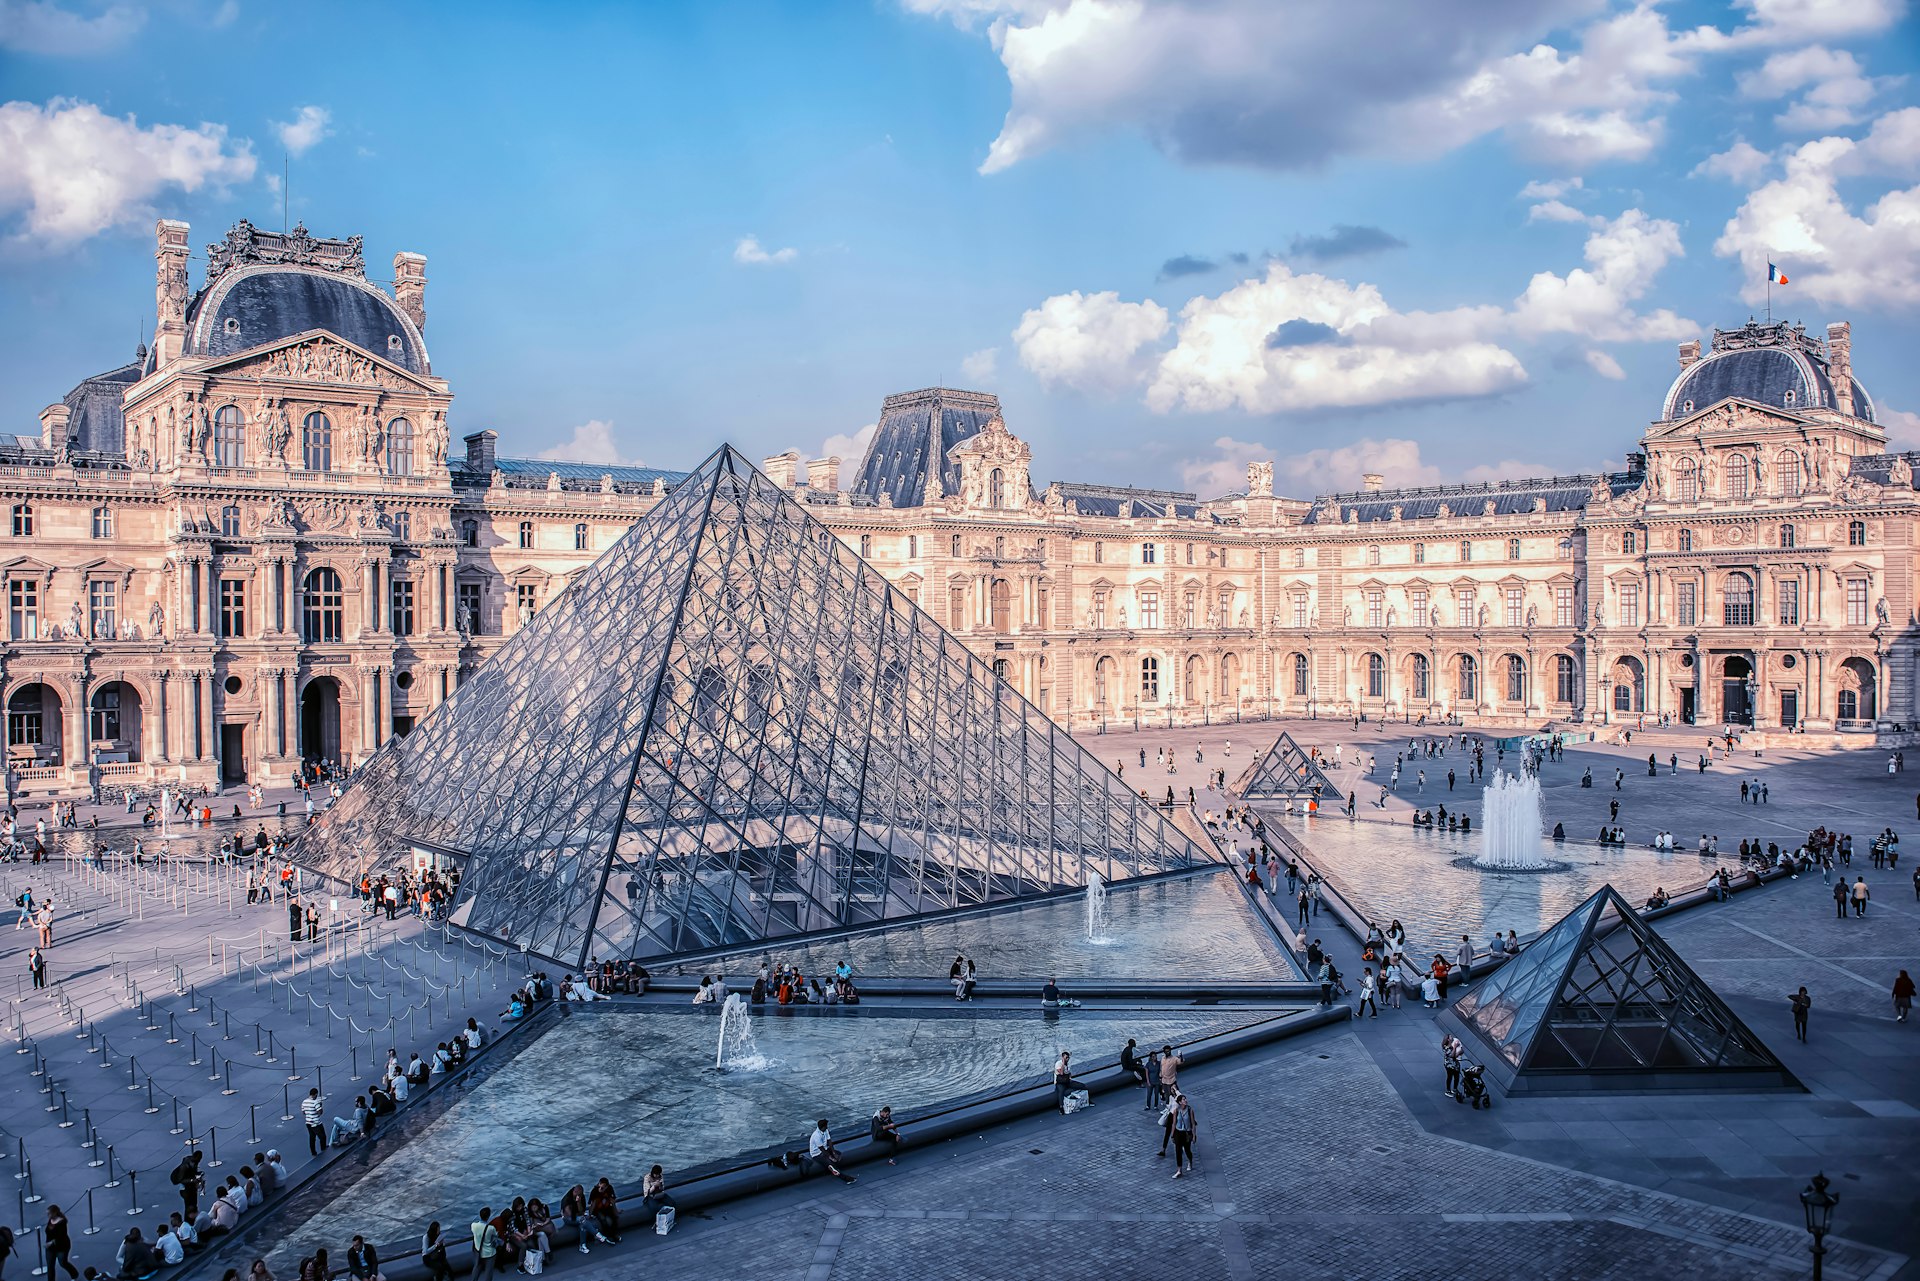 People walk around outside the Louvre museum in daytime. 